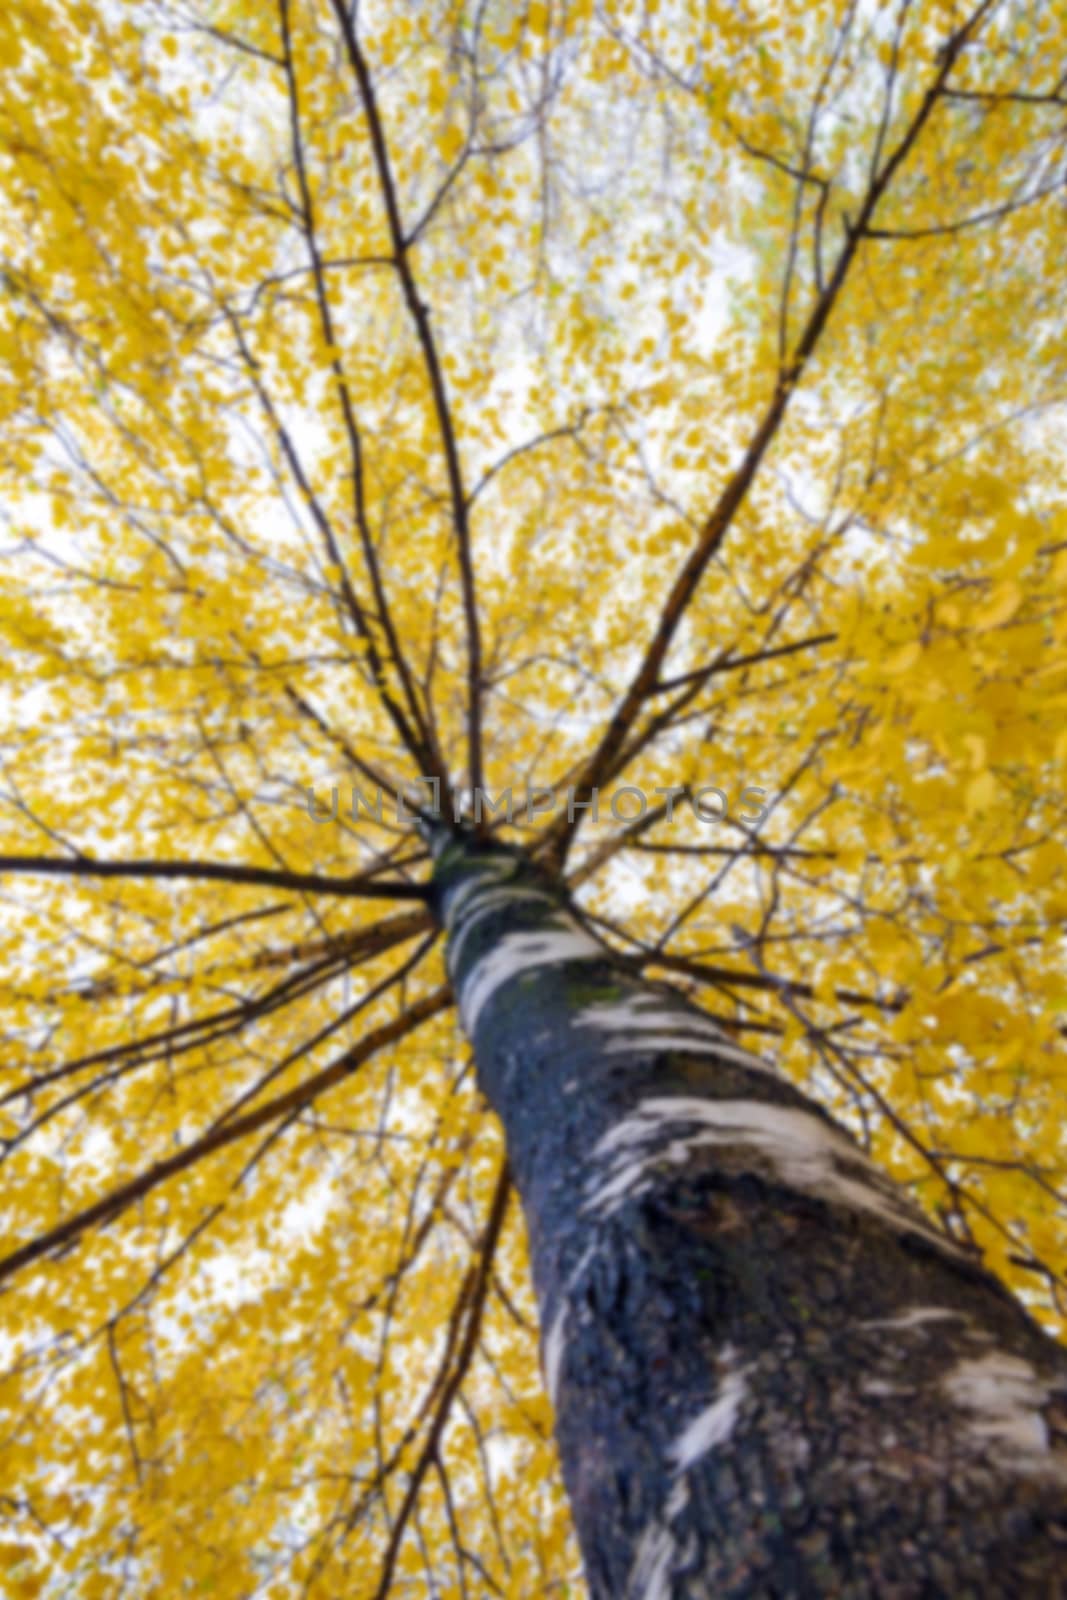 photographed trees and foliage in the autumn, the location - a park, defocus